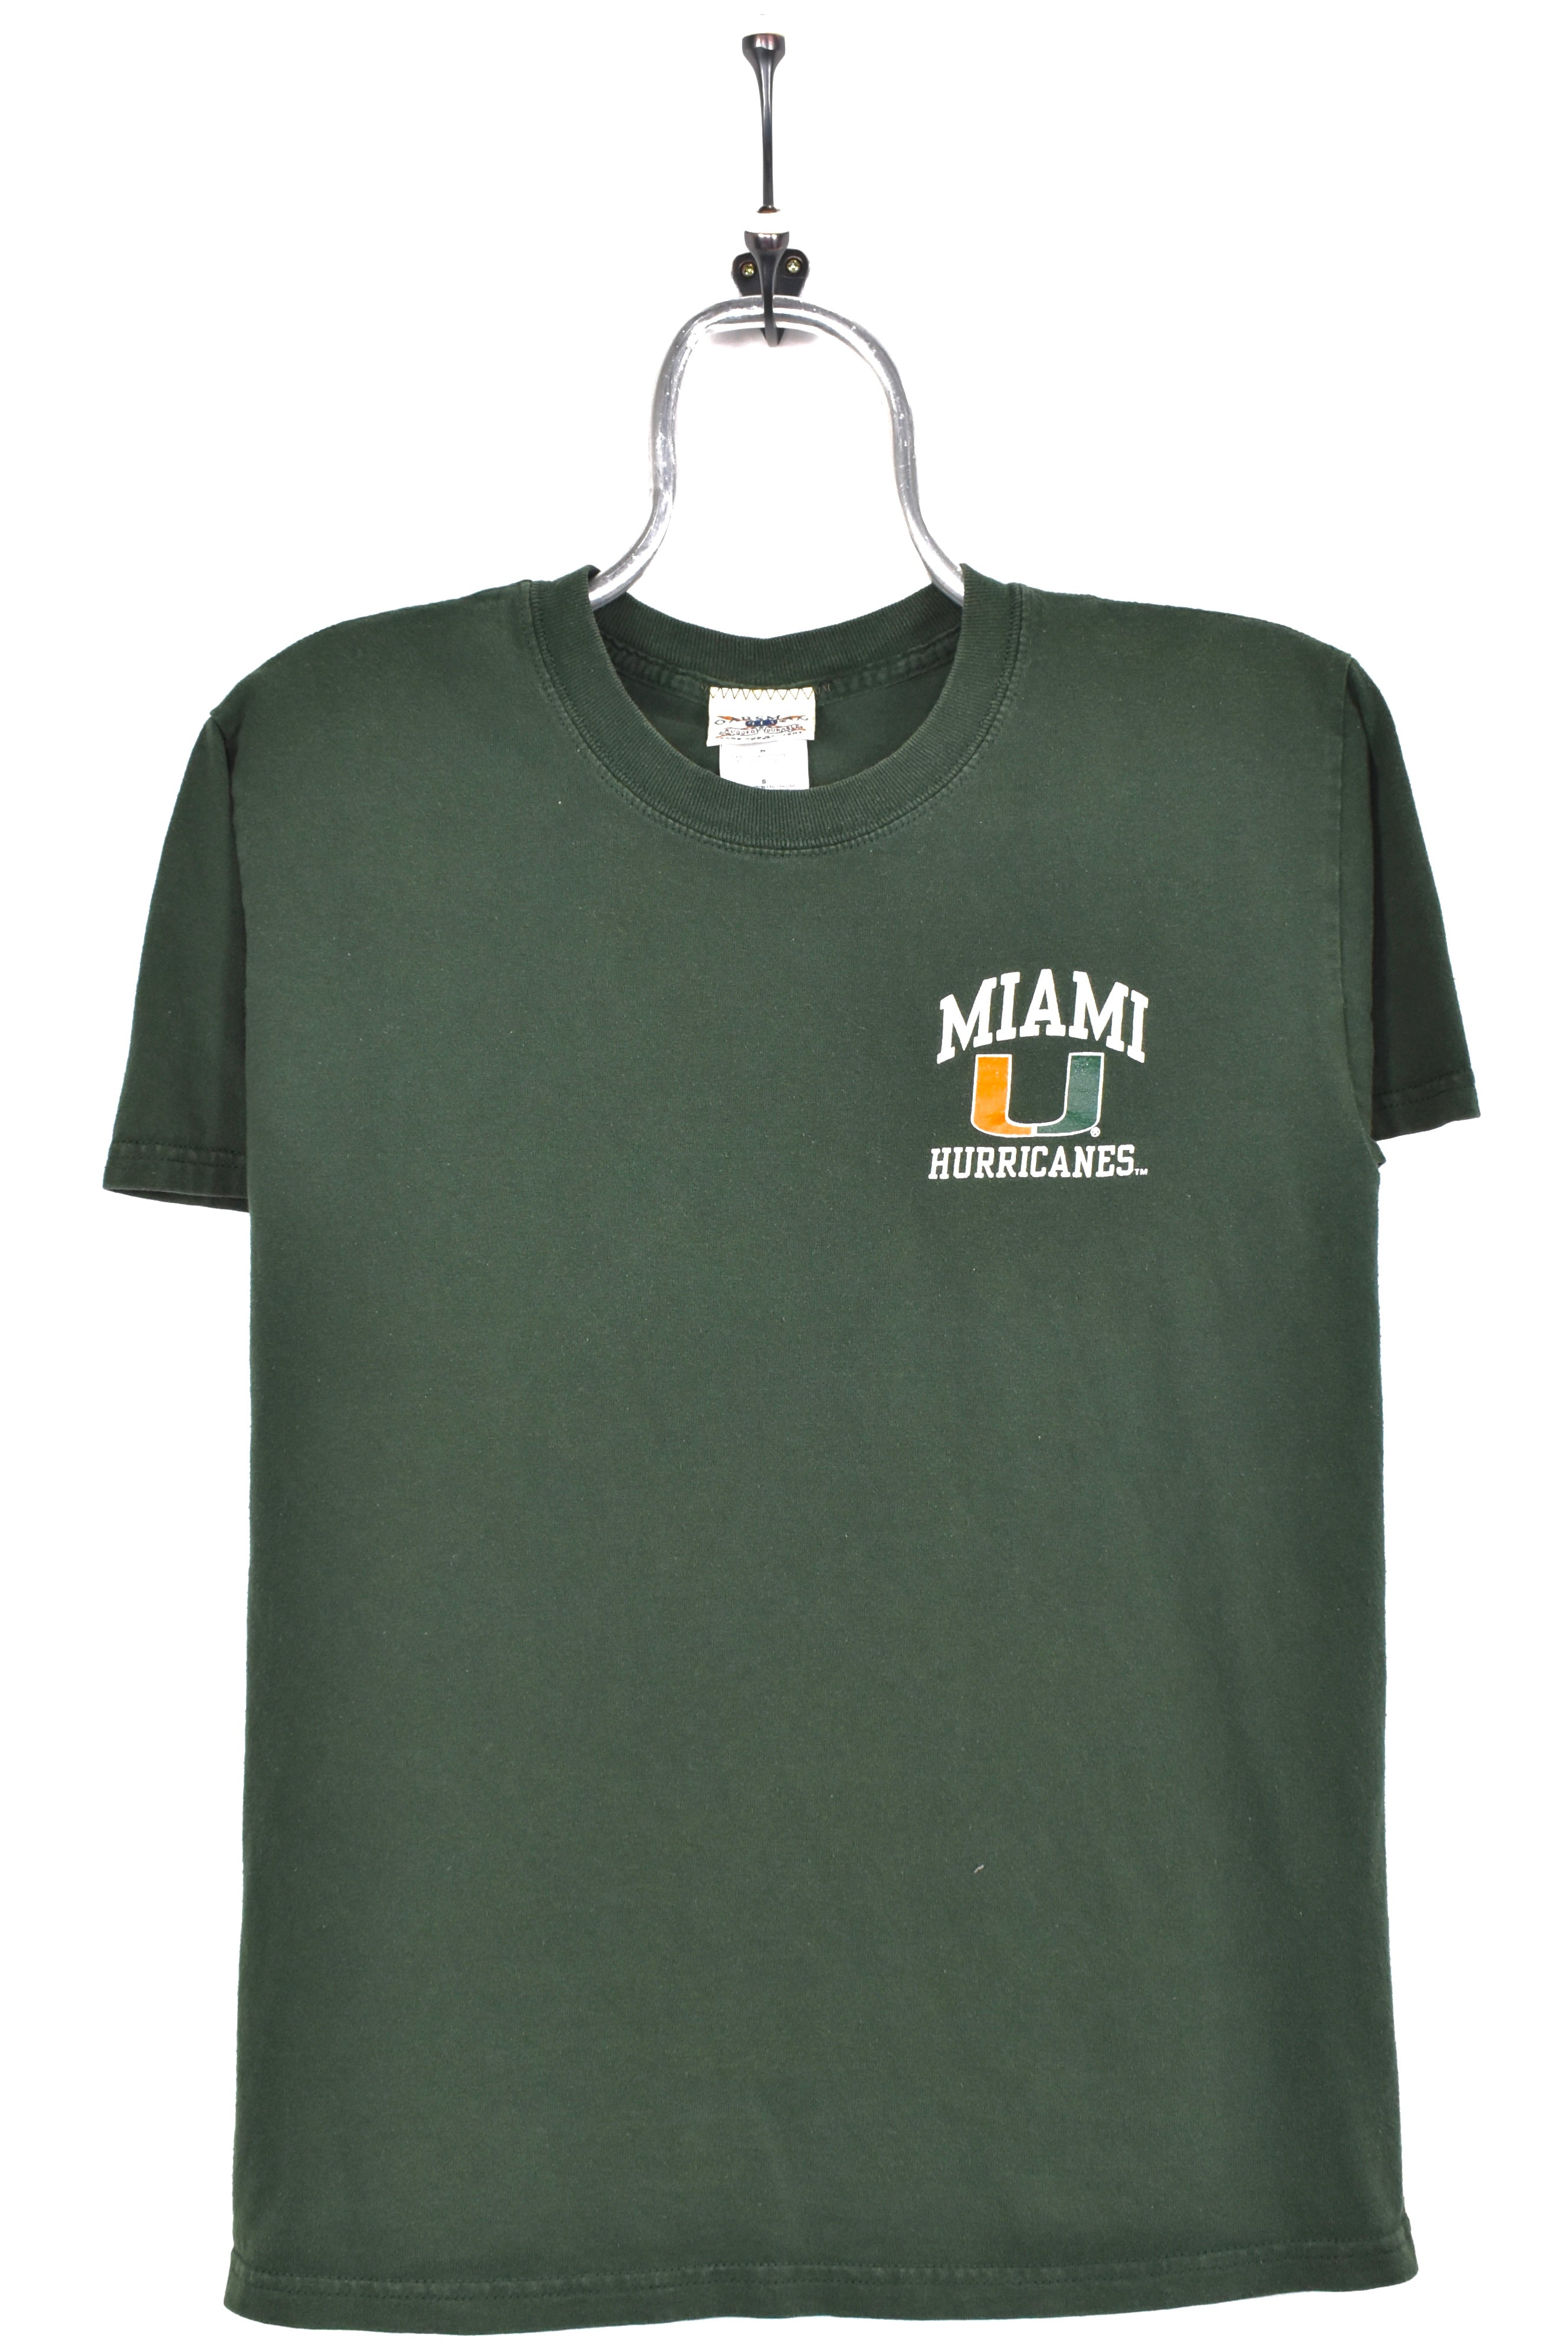 Vintage University of Miami shirt, Hurricanes green graphic graphic tee - AU Small COLLEGE